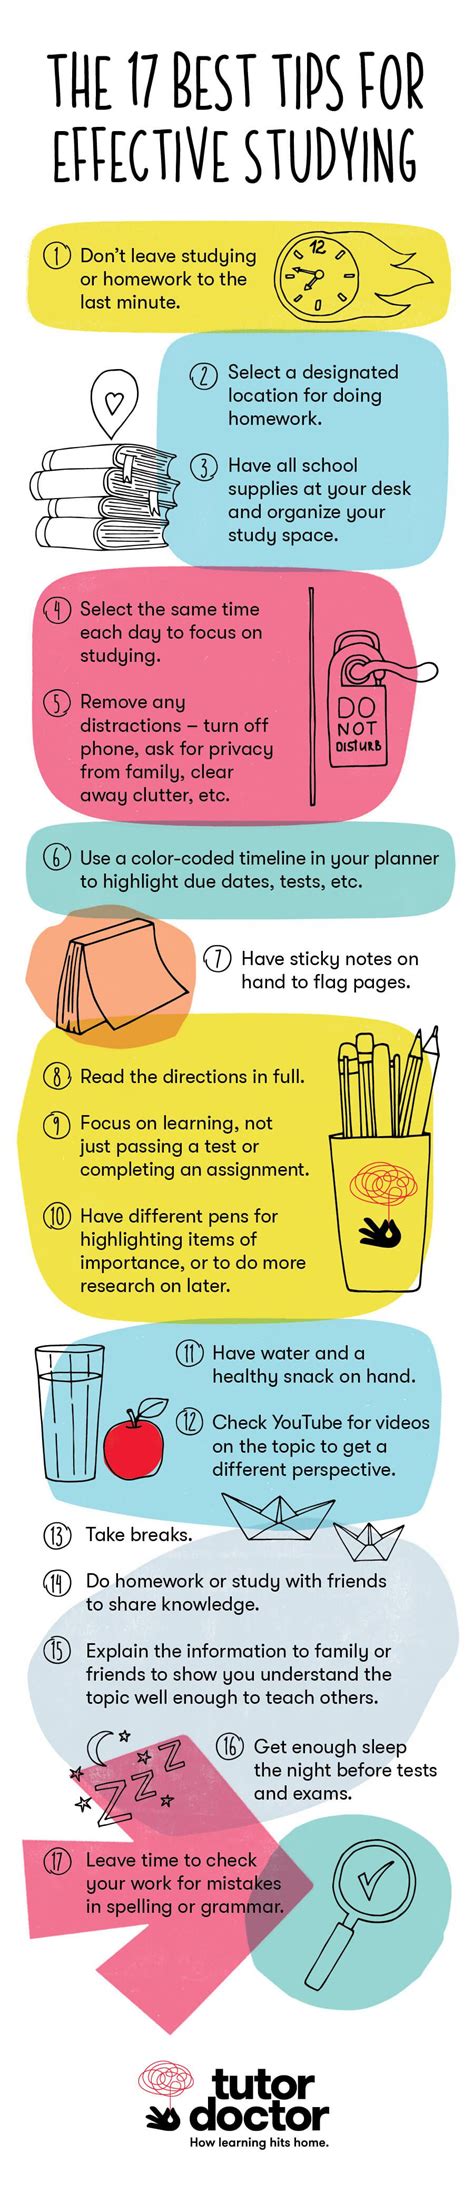 The 17 Best Tips For Effective Studying Infographic